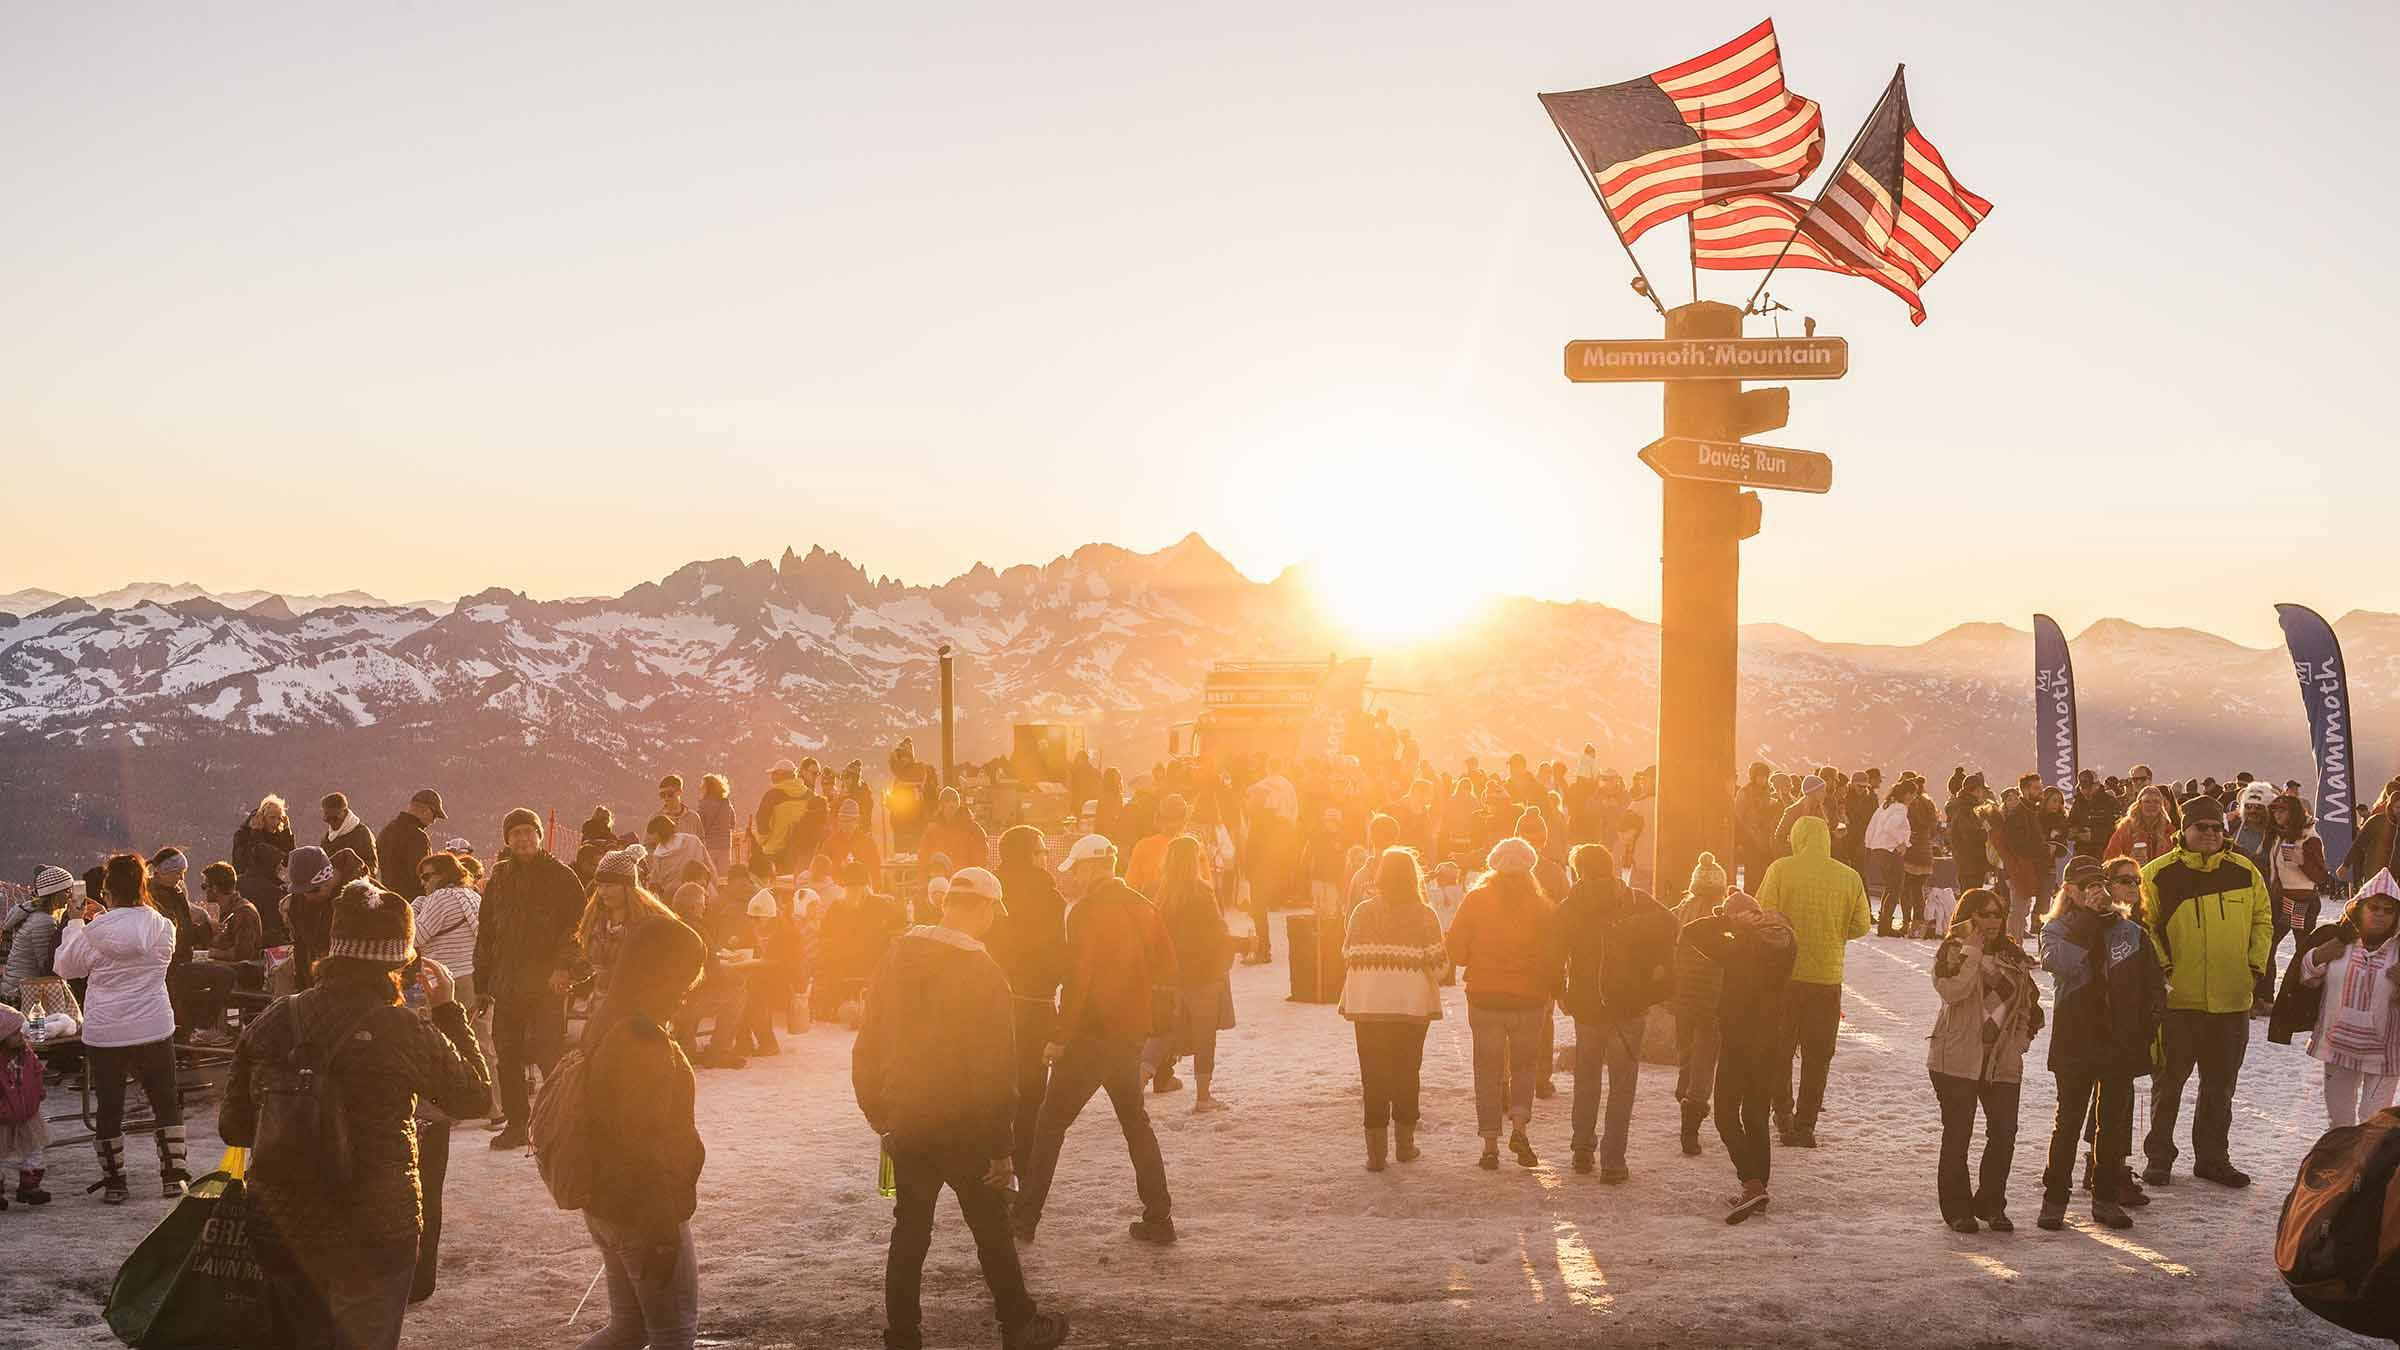 View of sun setting over Minarets from the top of Mammoth Mountain with American flags on top of the summit sign and crowd of people watching the sun set